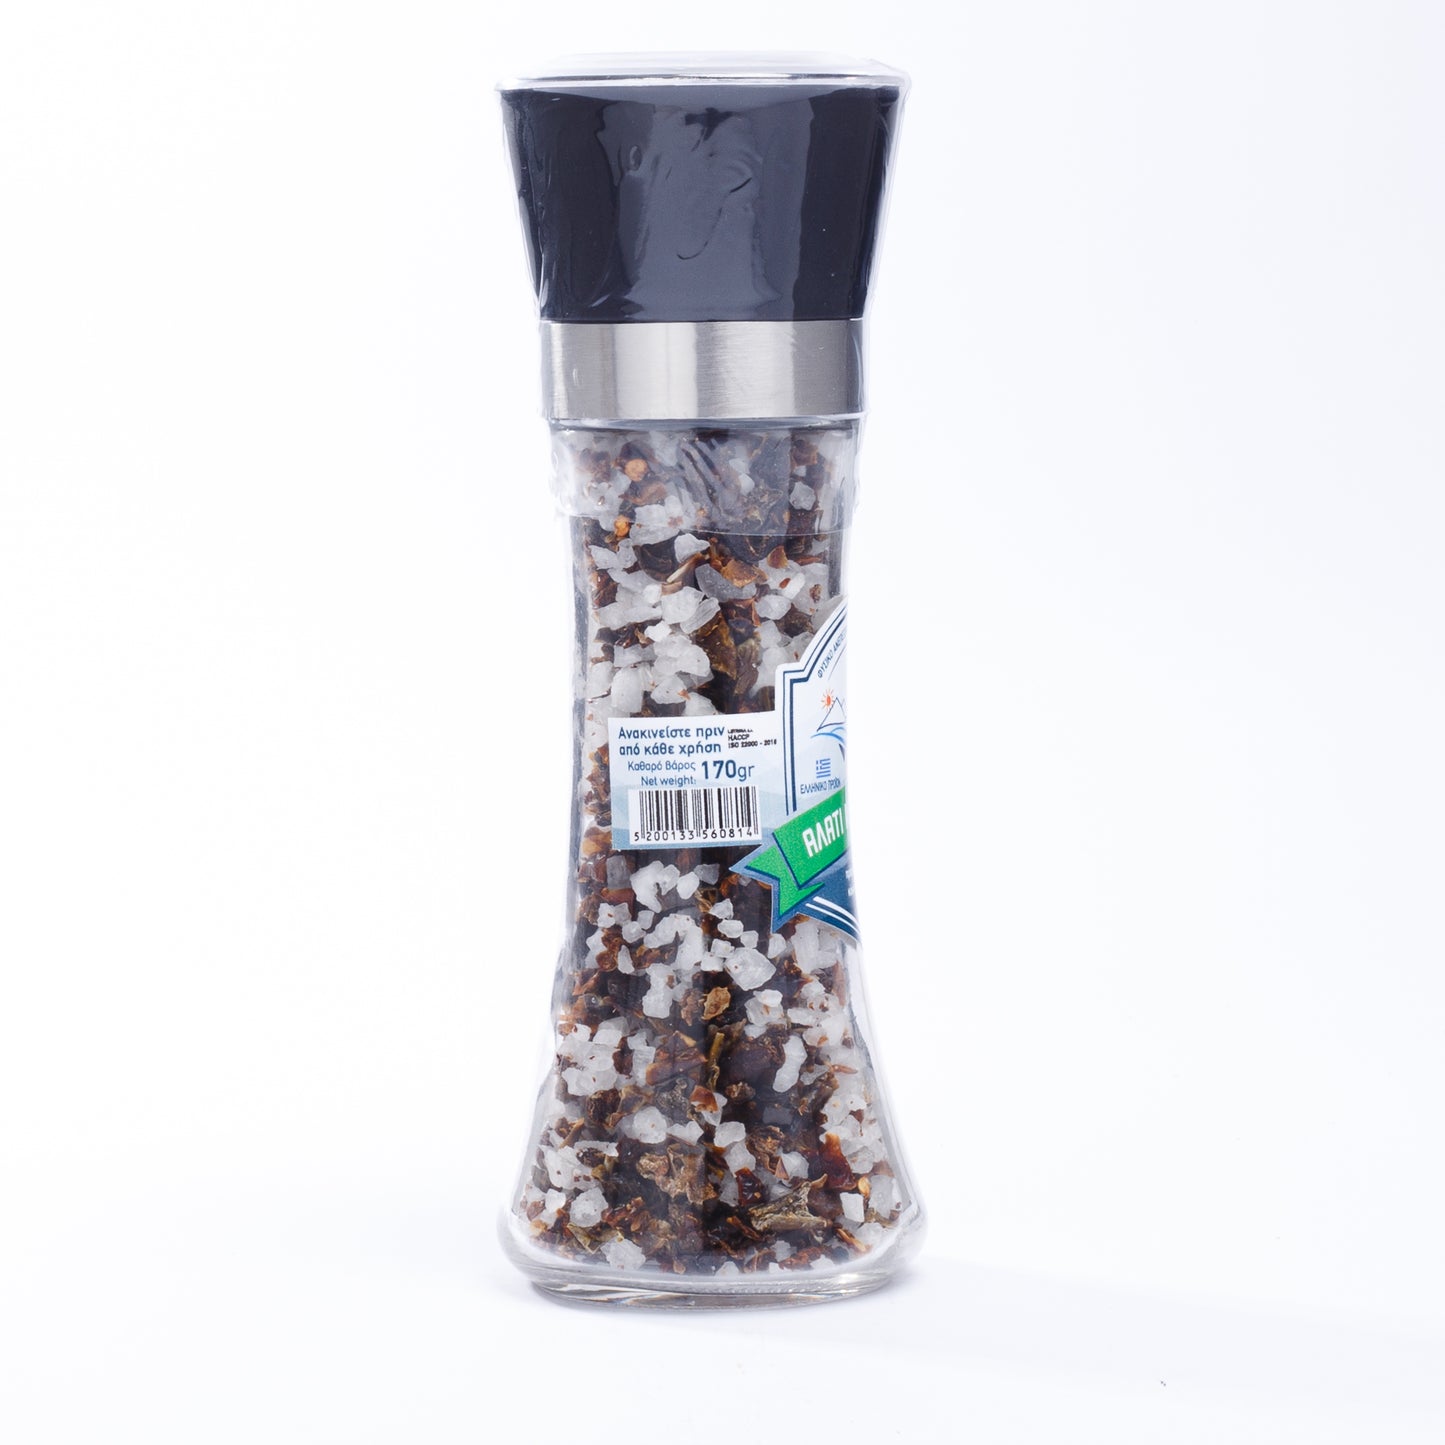 Xiros Mixture Coarse Salt With Peppers Mill 170gr